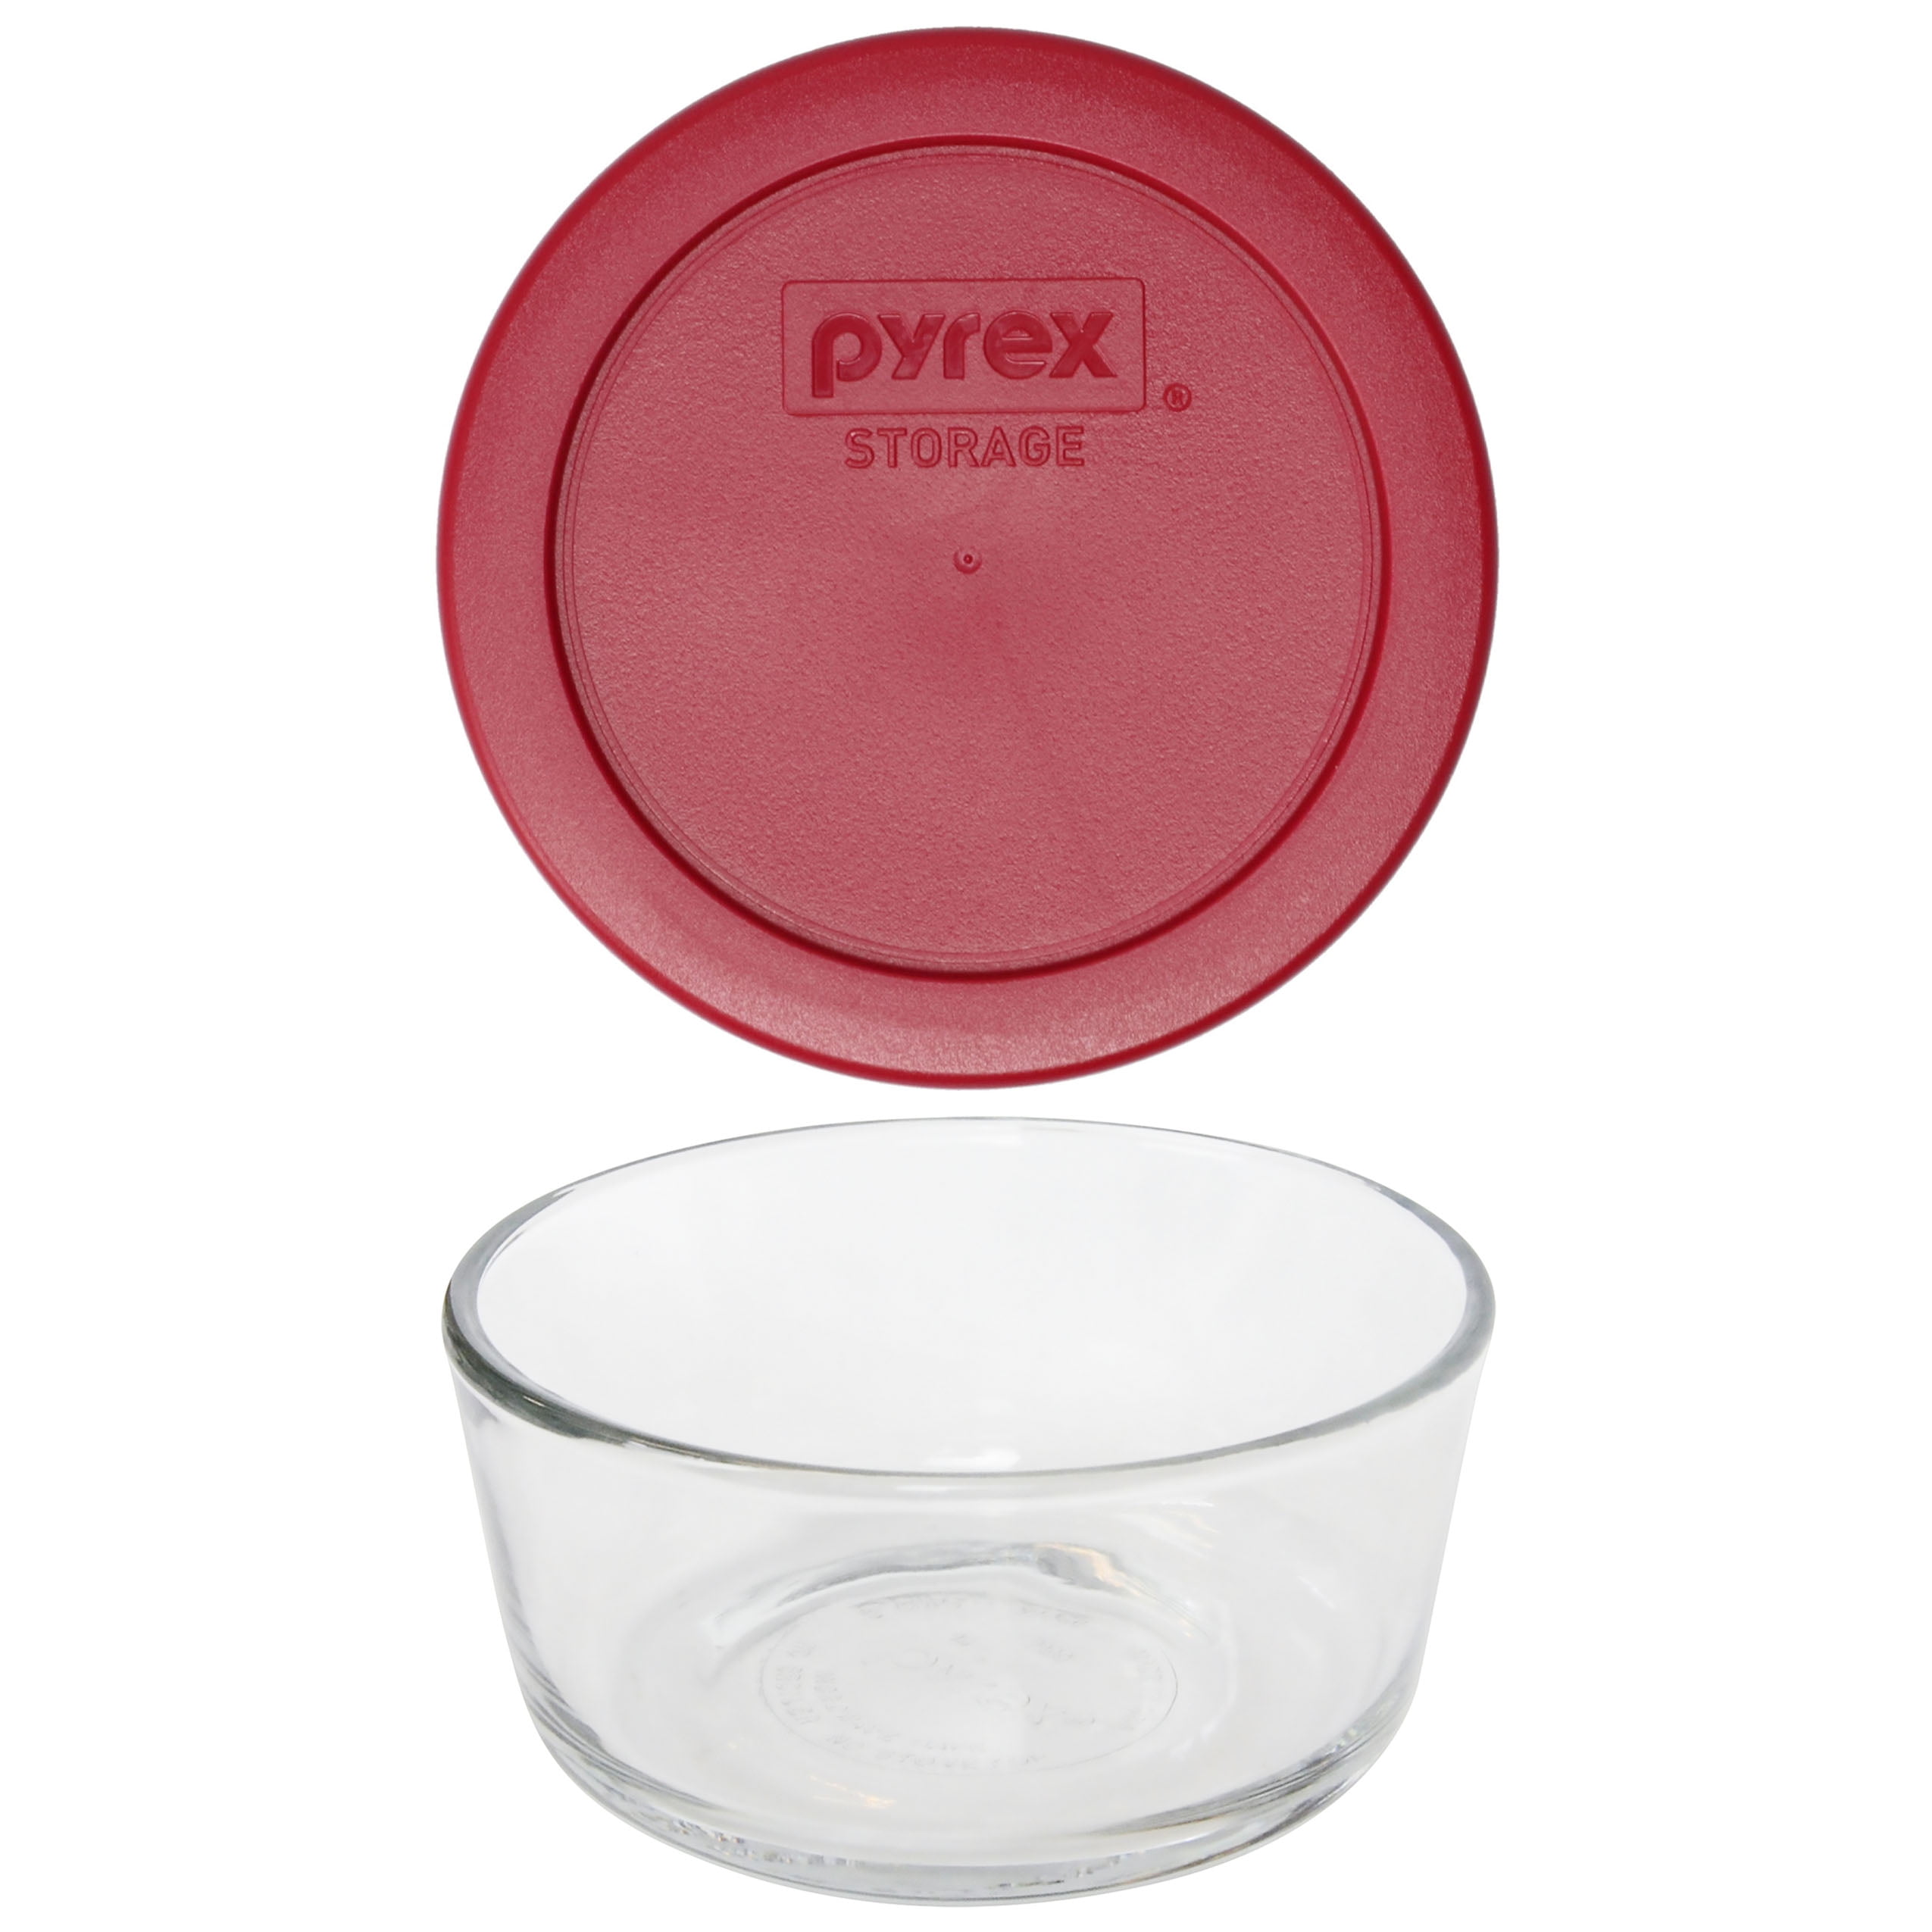 Pyrex 7200-PC Red Round 2 Cup Storage Lid for Glass Bowl 1, Red 